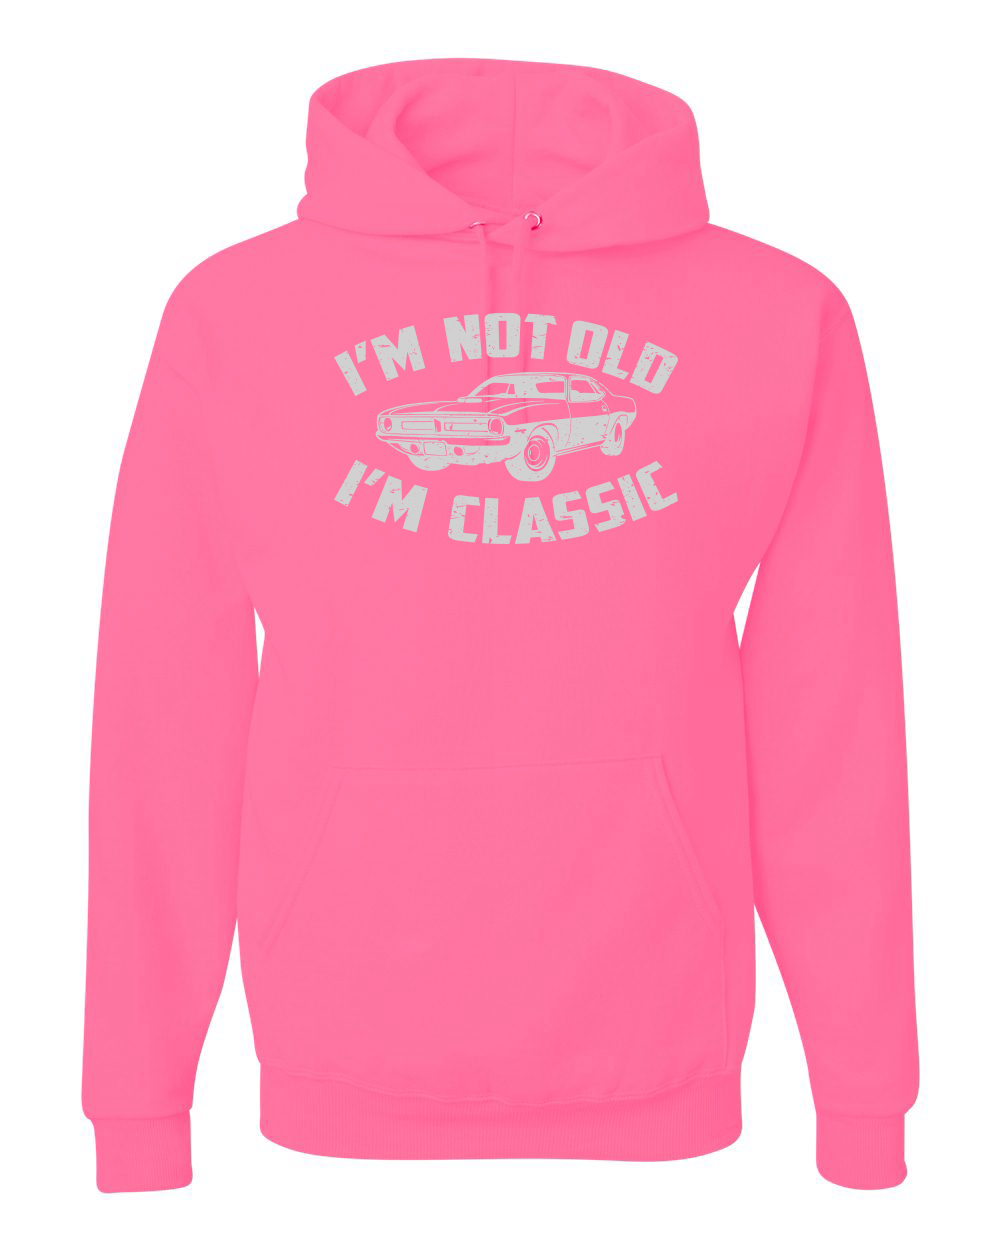 Funny Sarcastic Hoodie Not Old Sweater I'm Not Old I'm Classic Gift for Mom Dad I'm Just Old Enough to be a Classic Hooded Sweatshirt